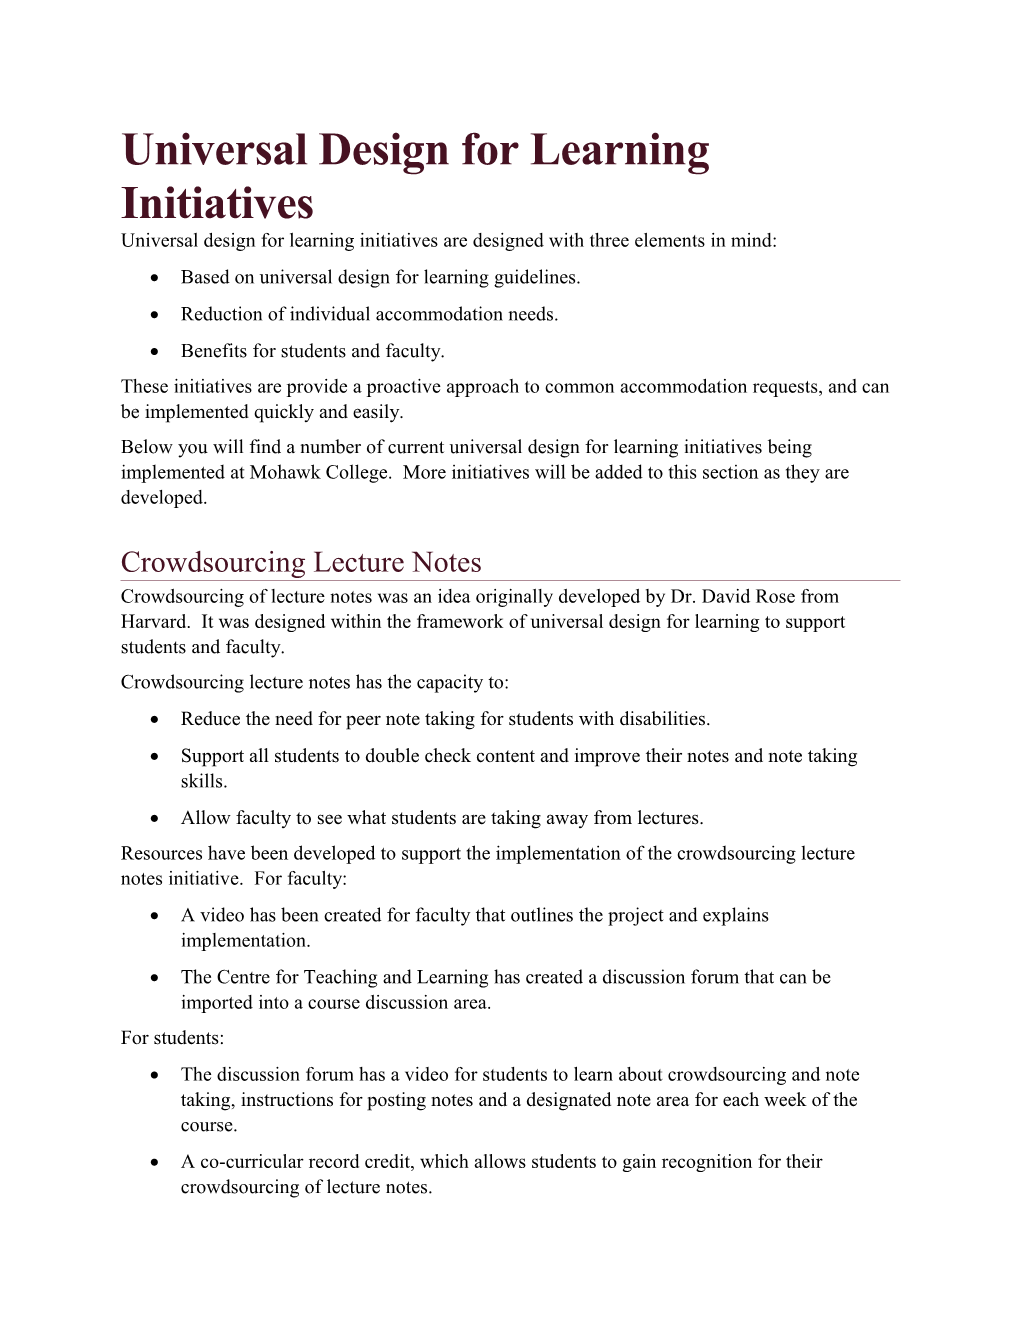 Universal Design for Learning Initiatives